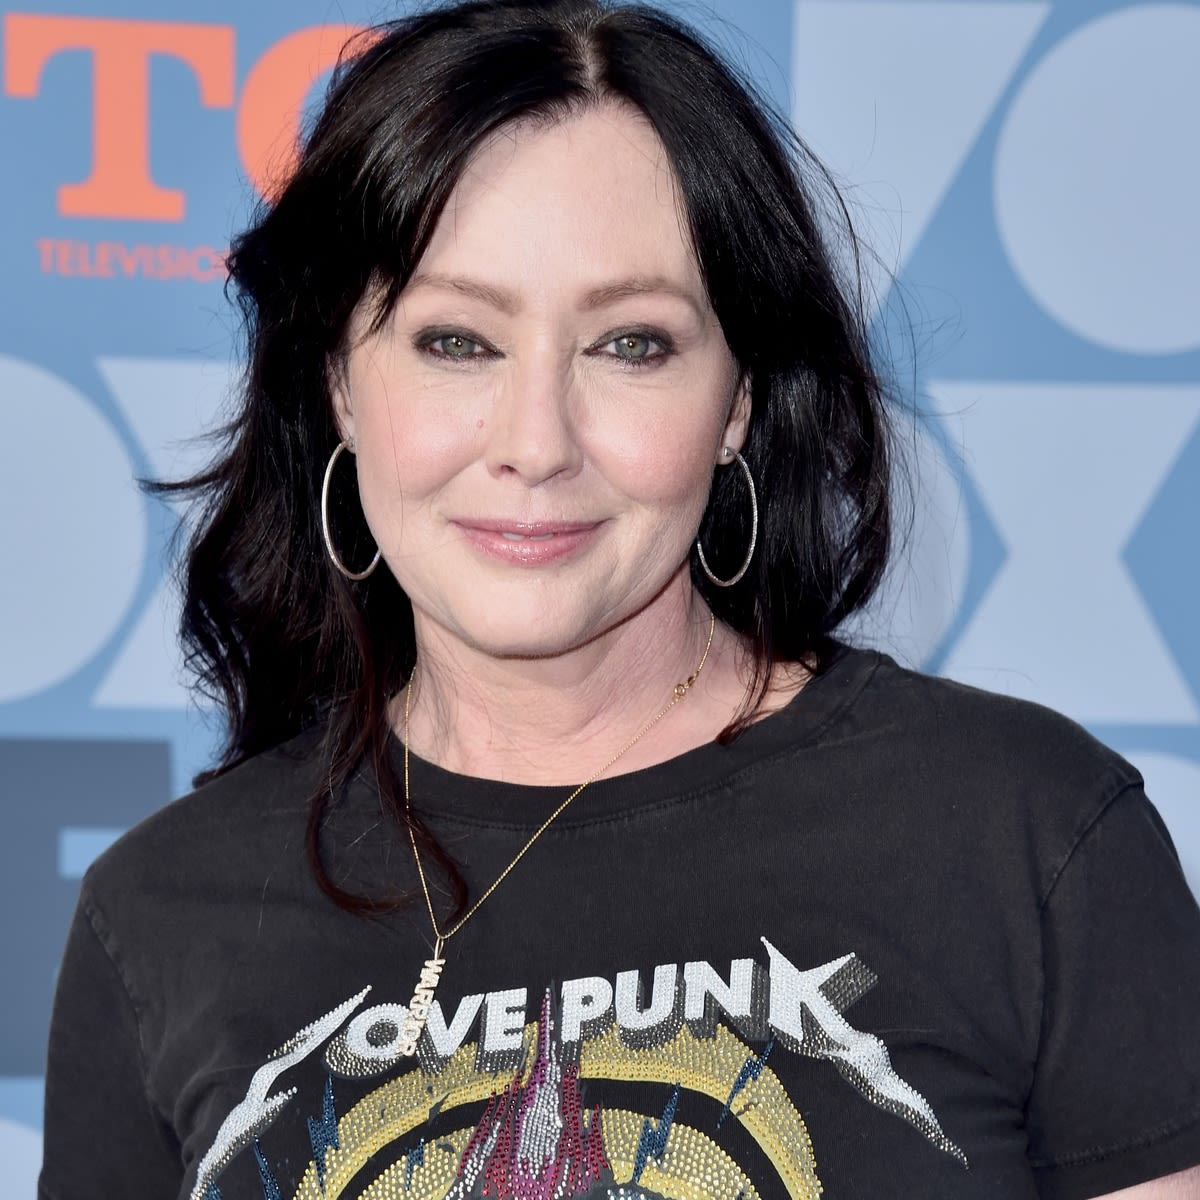 What Shannen Doherty Said About Motherhood Months Before Her Death